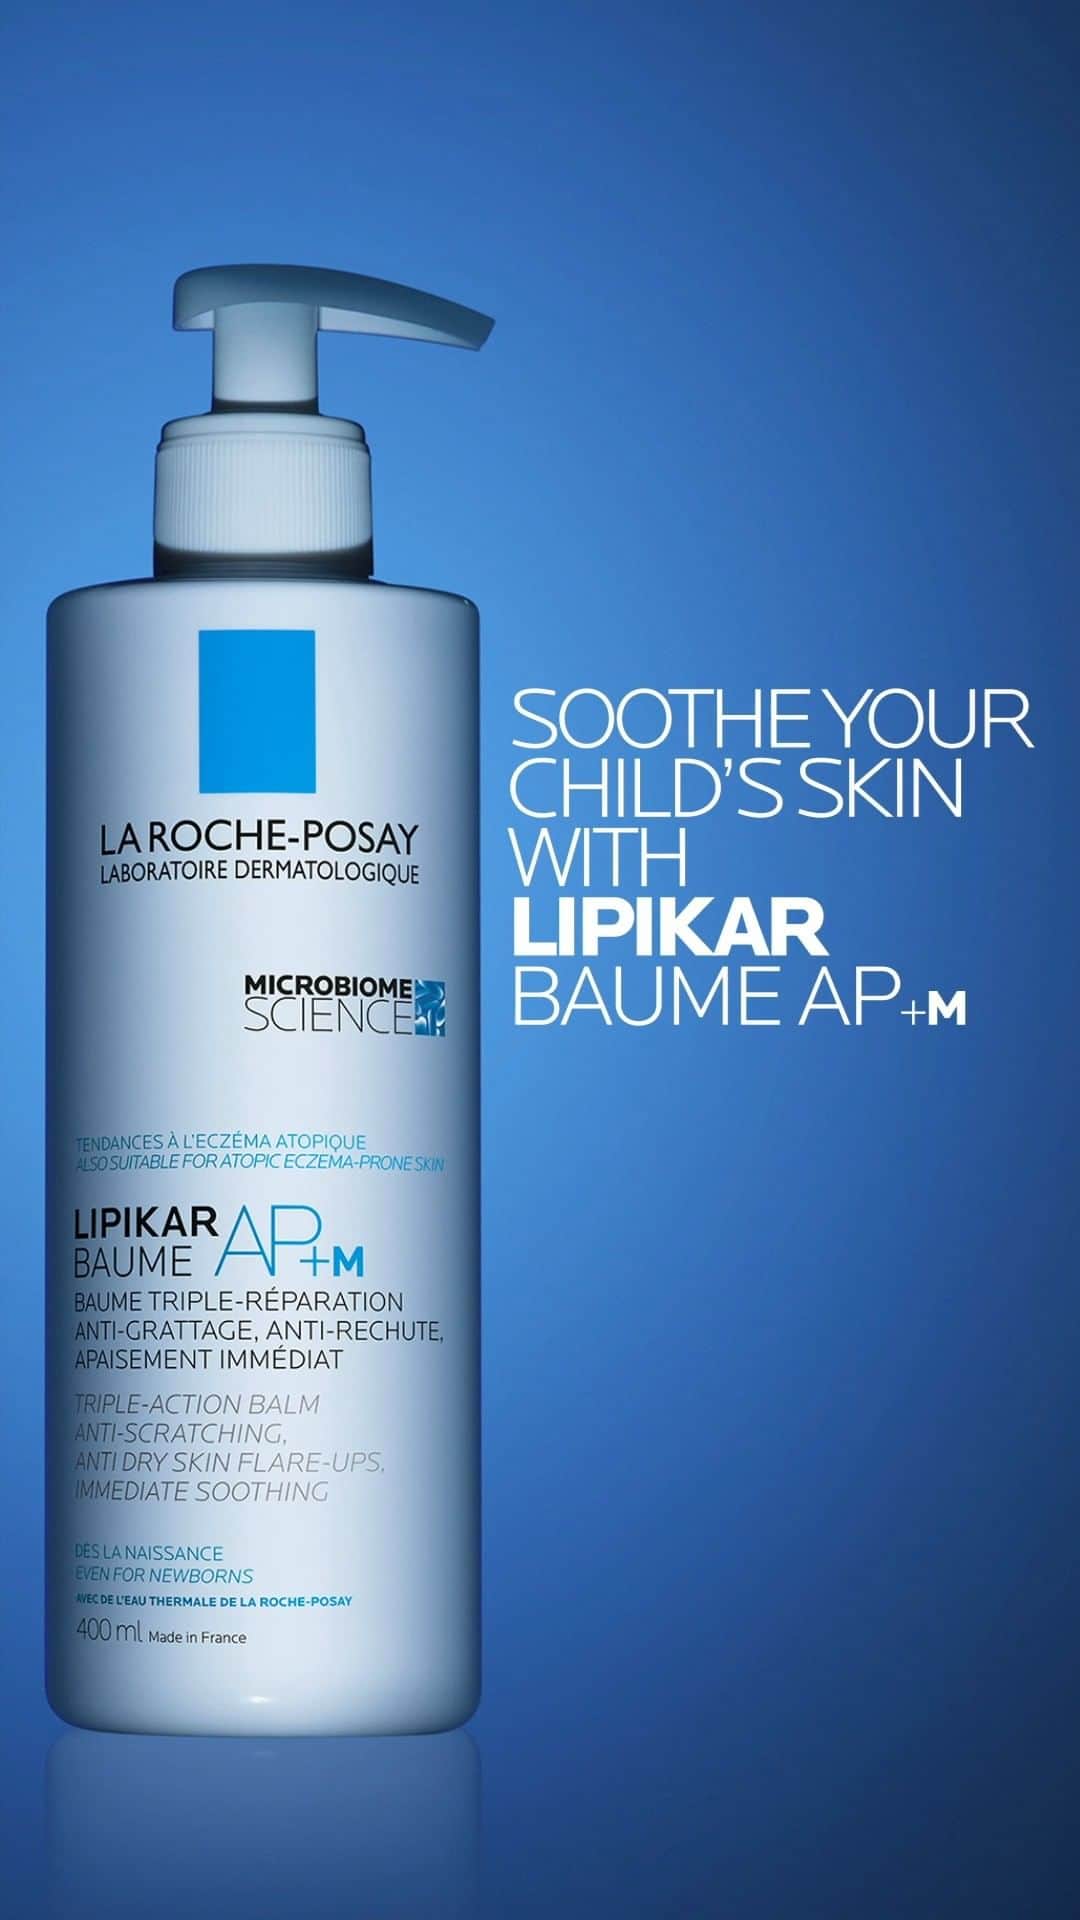 La Roche-Posayのインスタグラム：「Not to be confused with nervous or contact eczema, atopic eczema is most often hereditary and disappears in 50% of cases before adulthood. 👶 It can cause irritation, itching and burning. For atopic-eczema prone skin, we recommend using a gentle emollient, such as Lipikar AP+M, to rebalance the skin’s microbiome and relieve discomfort.  Watch our video to learn more about atopic-eczema prone skin, and feel free to ask us any questions related to the topic! 🤗  All languages spoken here! Feel free to talk to us at anytime. #larocheposay #lipikar #atopiceczemaproneskin #sensitiveskin Global official page from La Roche-Posay, France.」